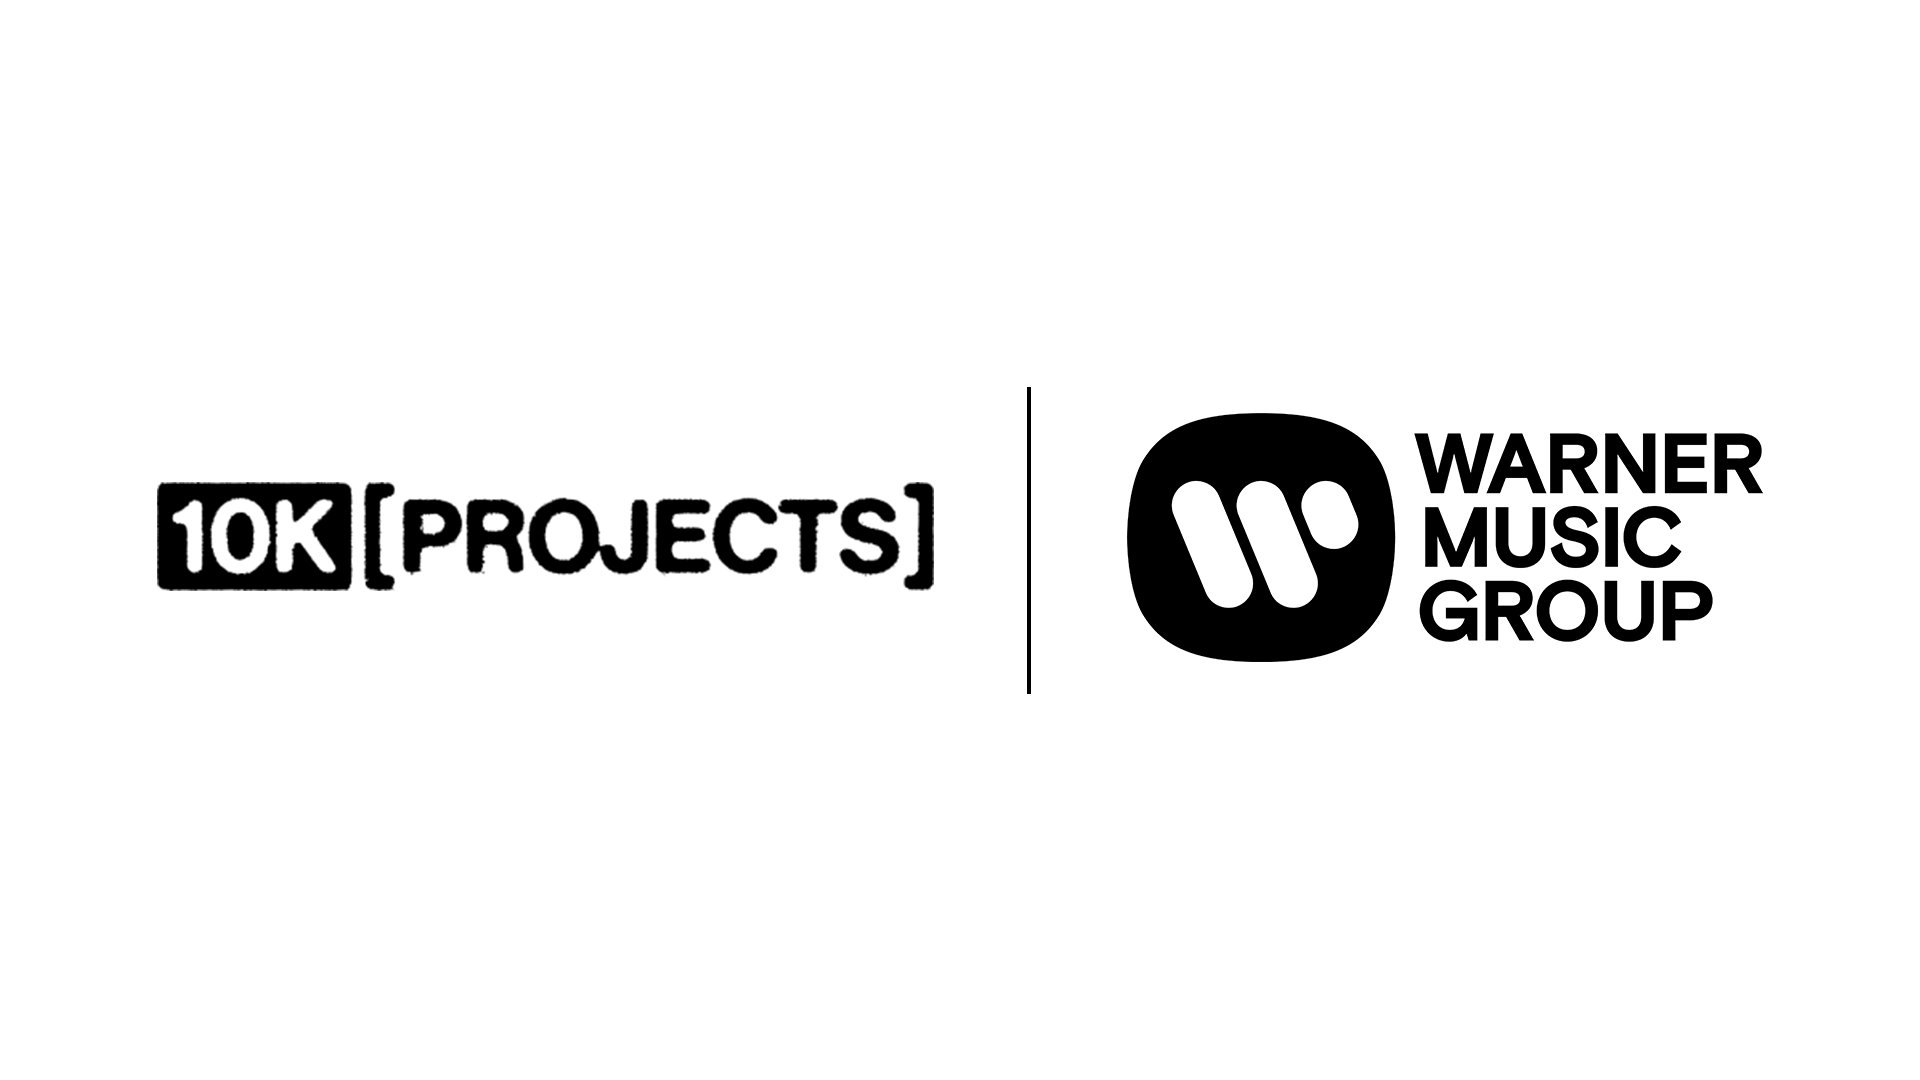 WARNER MUSIC GROUP AND ELLIOT GRAINGE’S 10K PROJECTS ANNOUNCE JOINT VENTURE